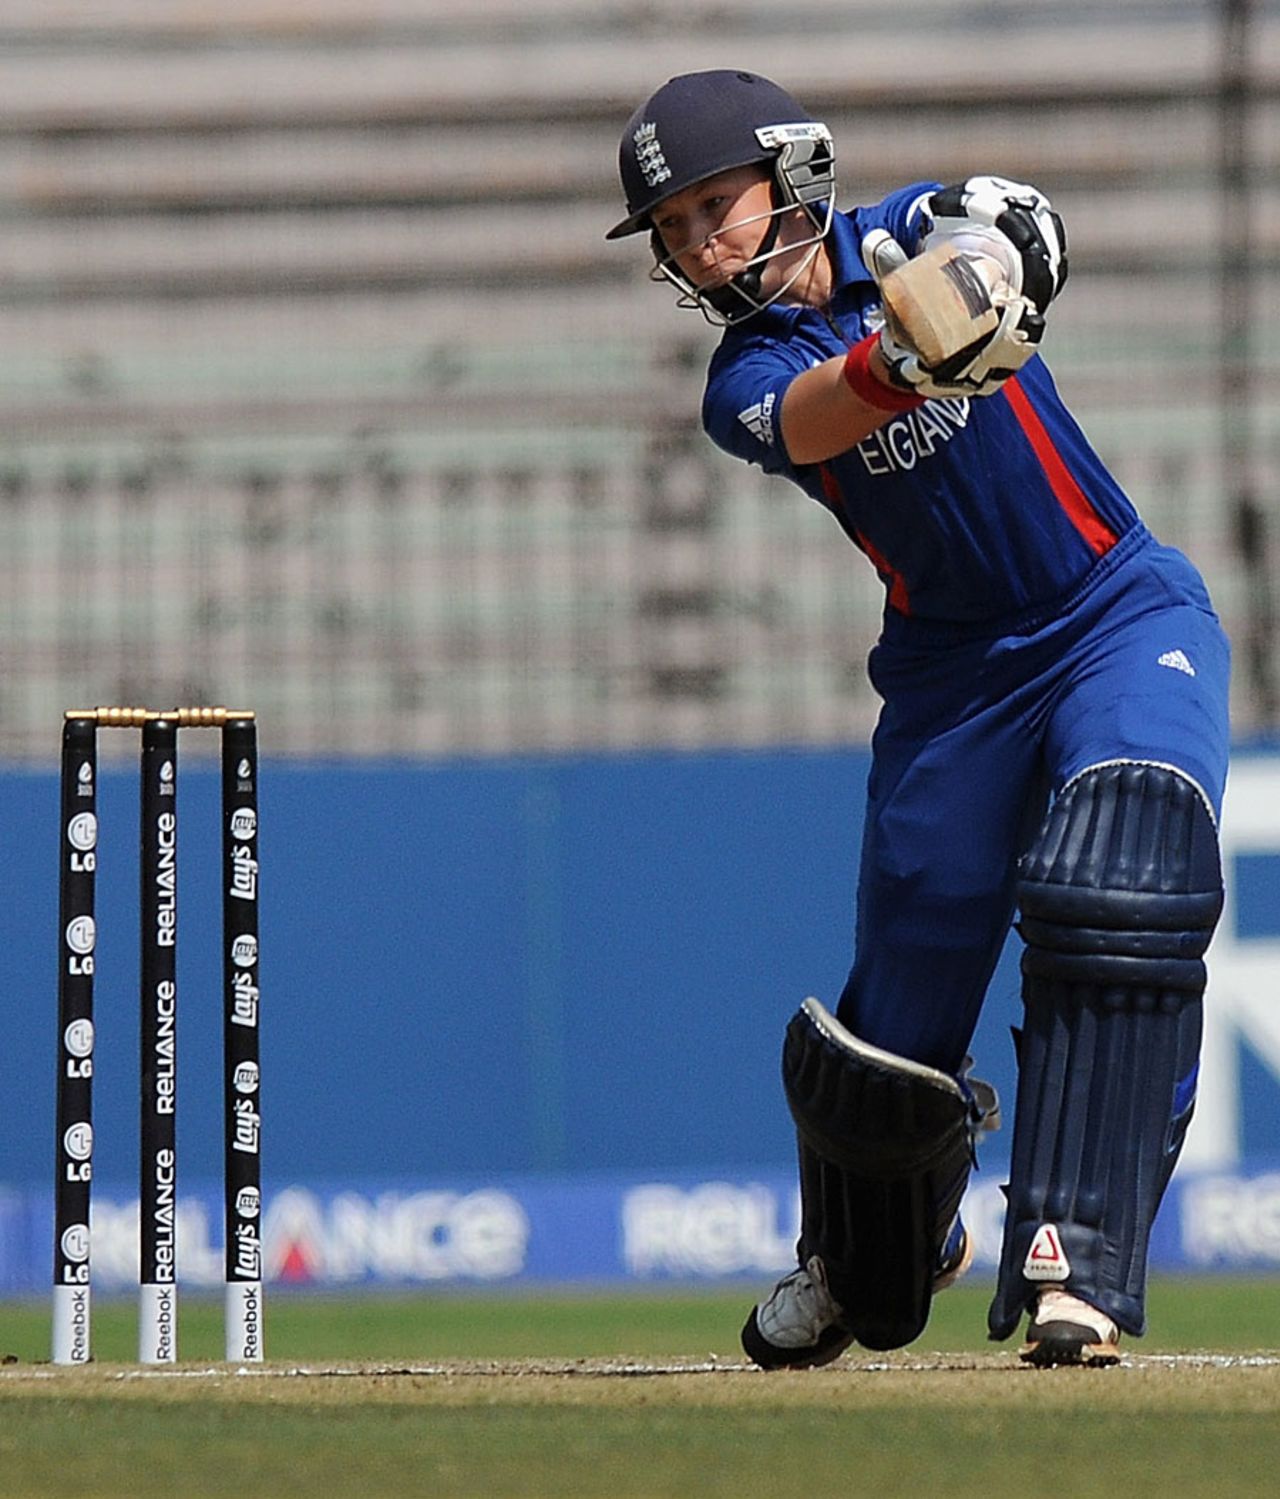 Arran Brindle scored an unbeaten 28 to help England chase 77, England v South Africa, Super Six, Women's World Cup 2013, Cuttack, February 10, 2013